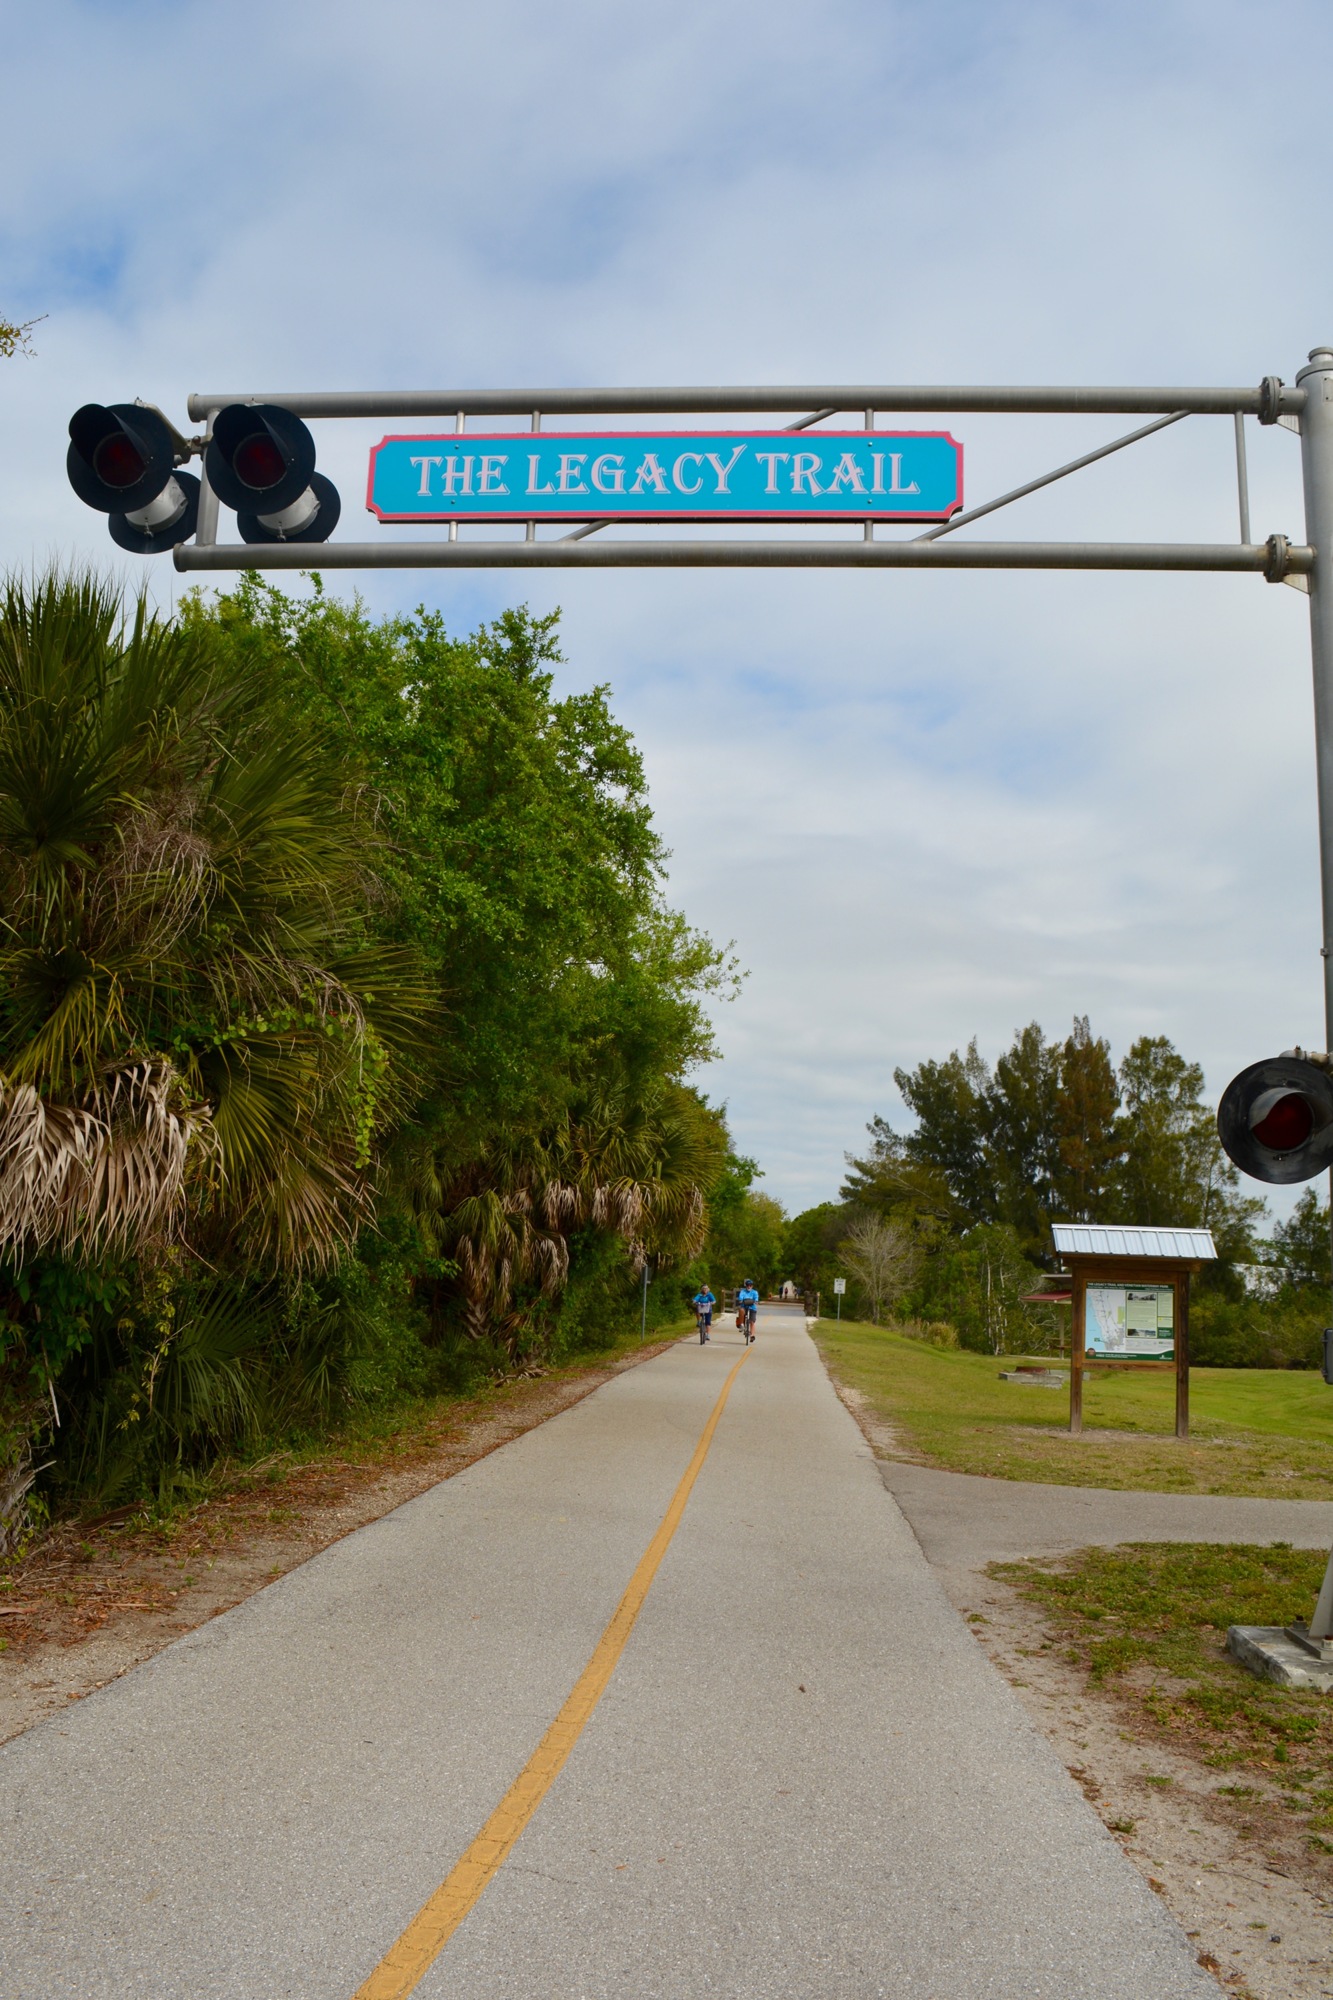 Upon completion of the extension in 2023, the total distance of the Legacy Trail will be 18.1 miles.